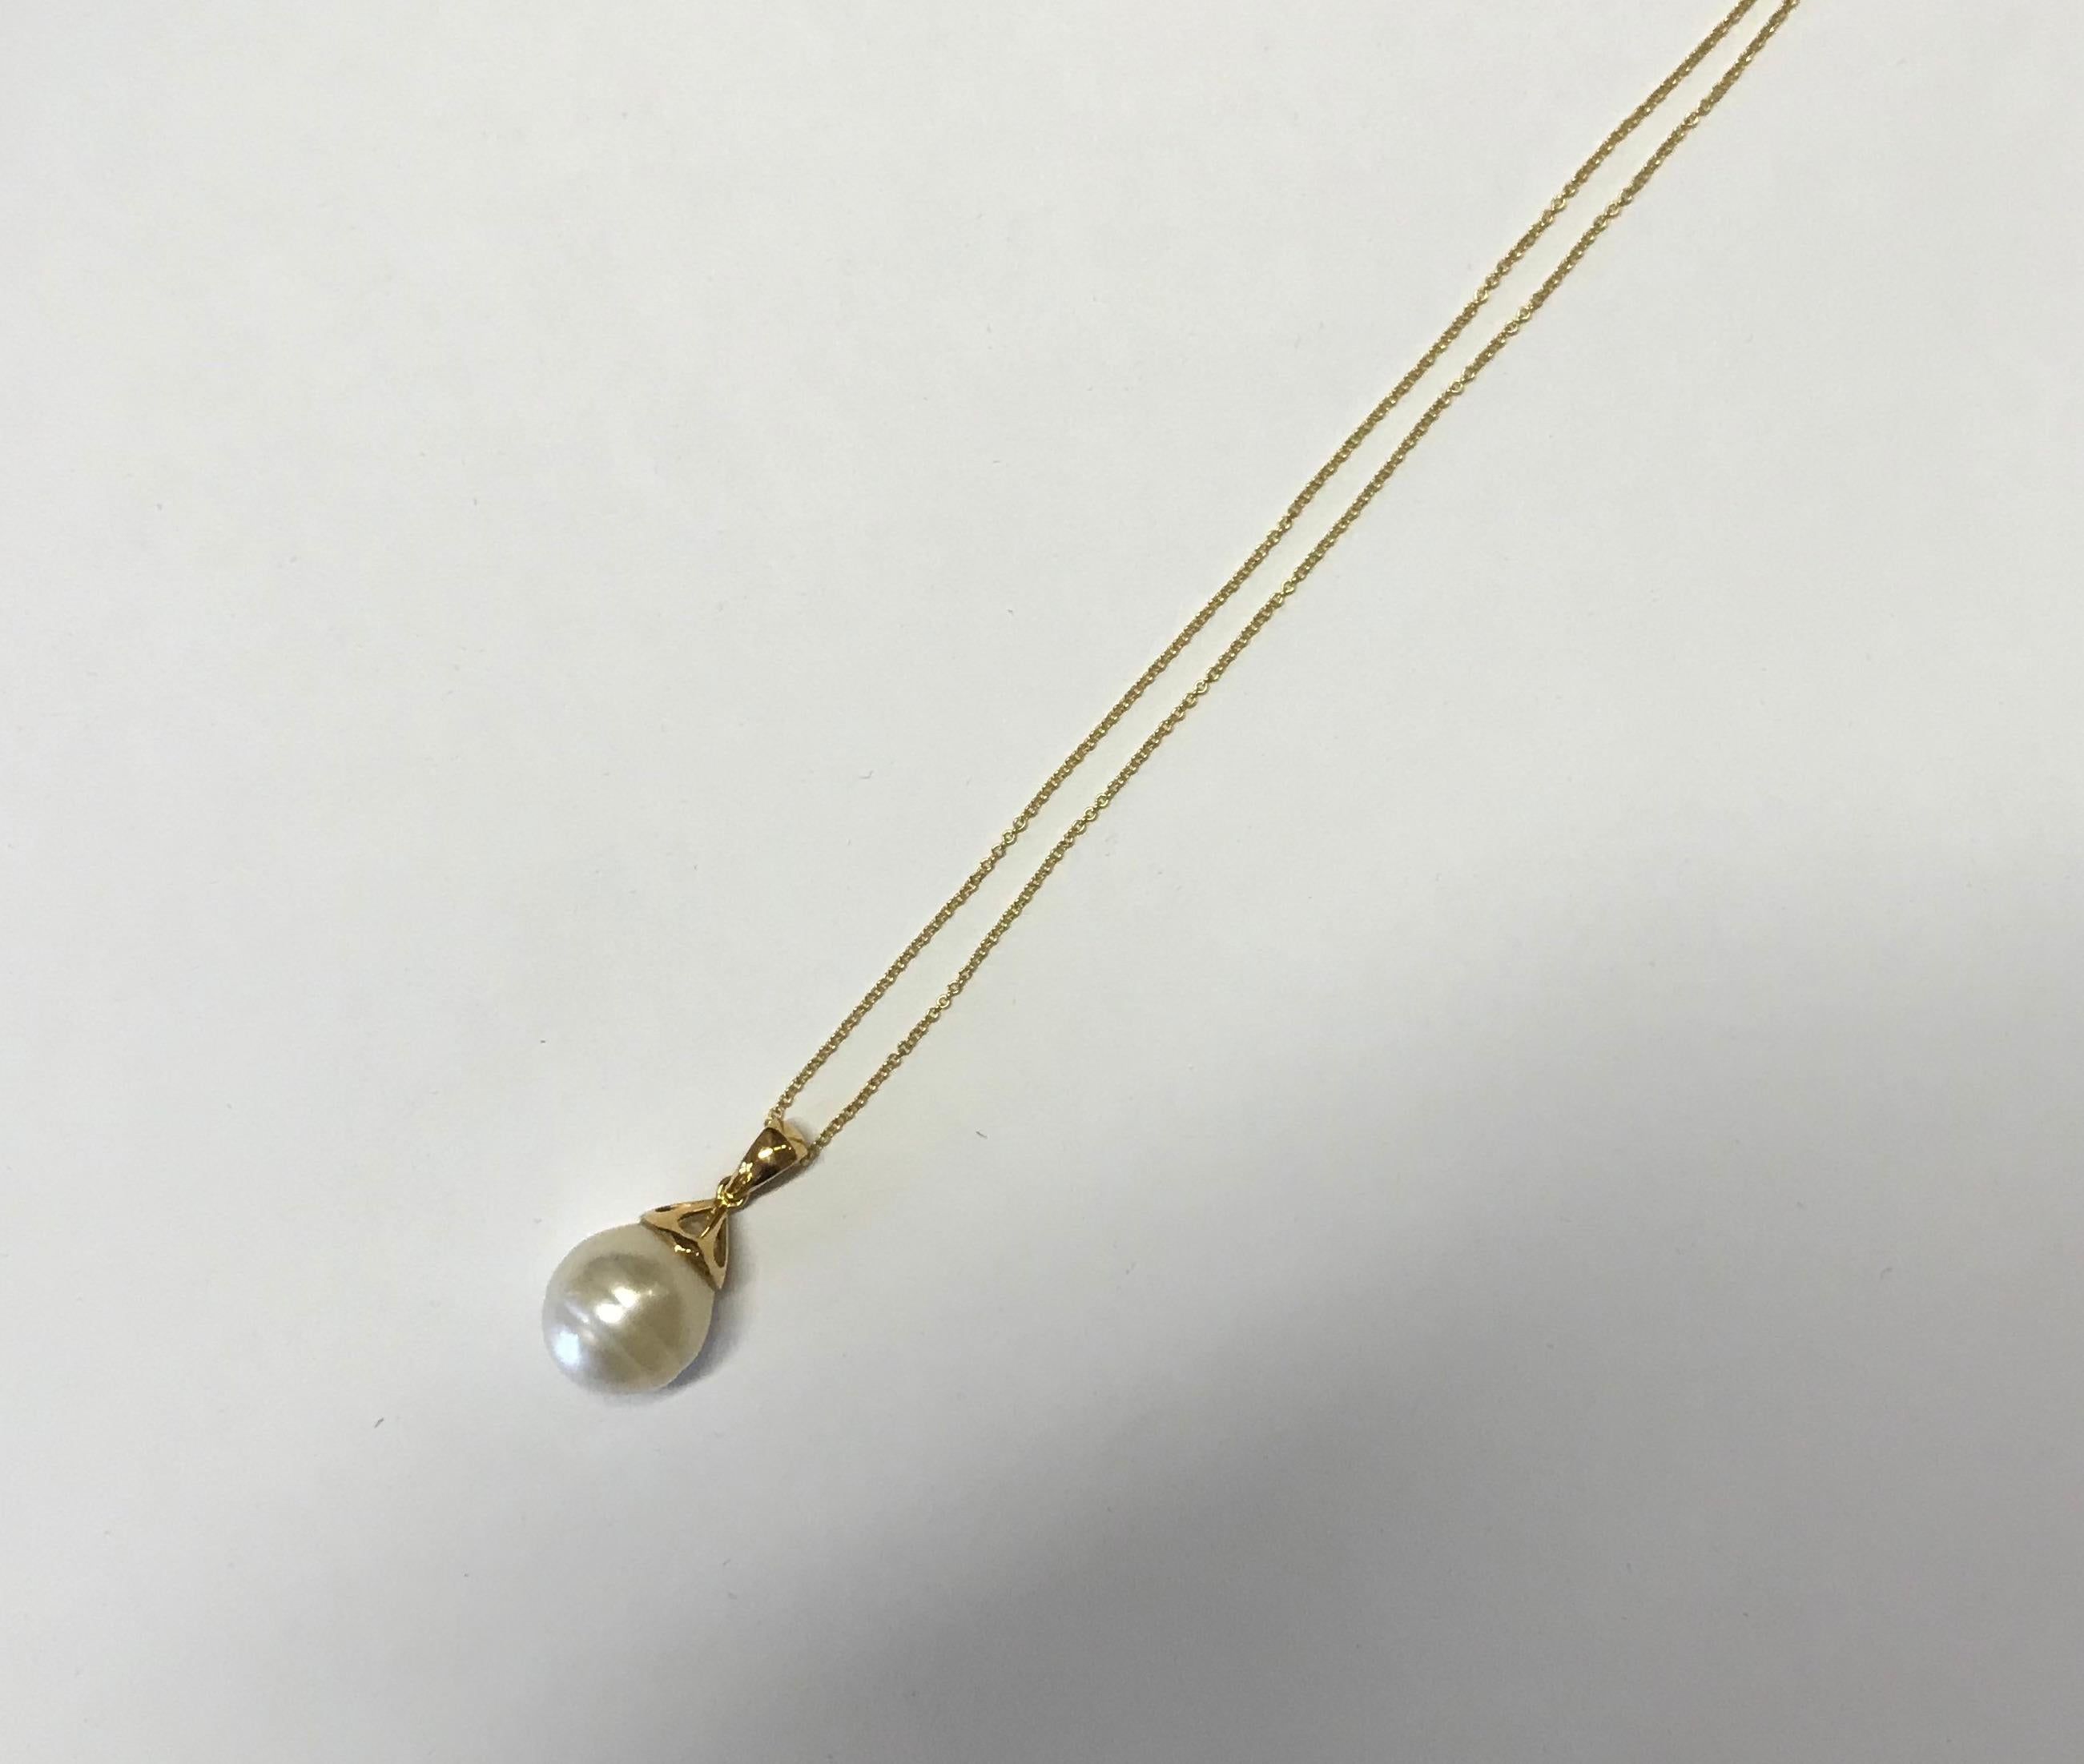 Round Cut White Natural Pearl Pendant Necklace Chain 18k Yellow Gold Open Bail Design For Sale